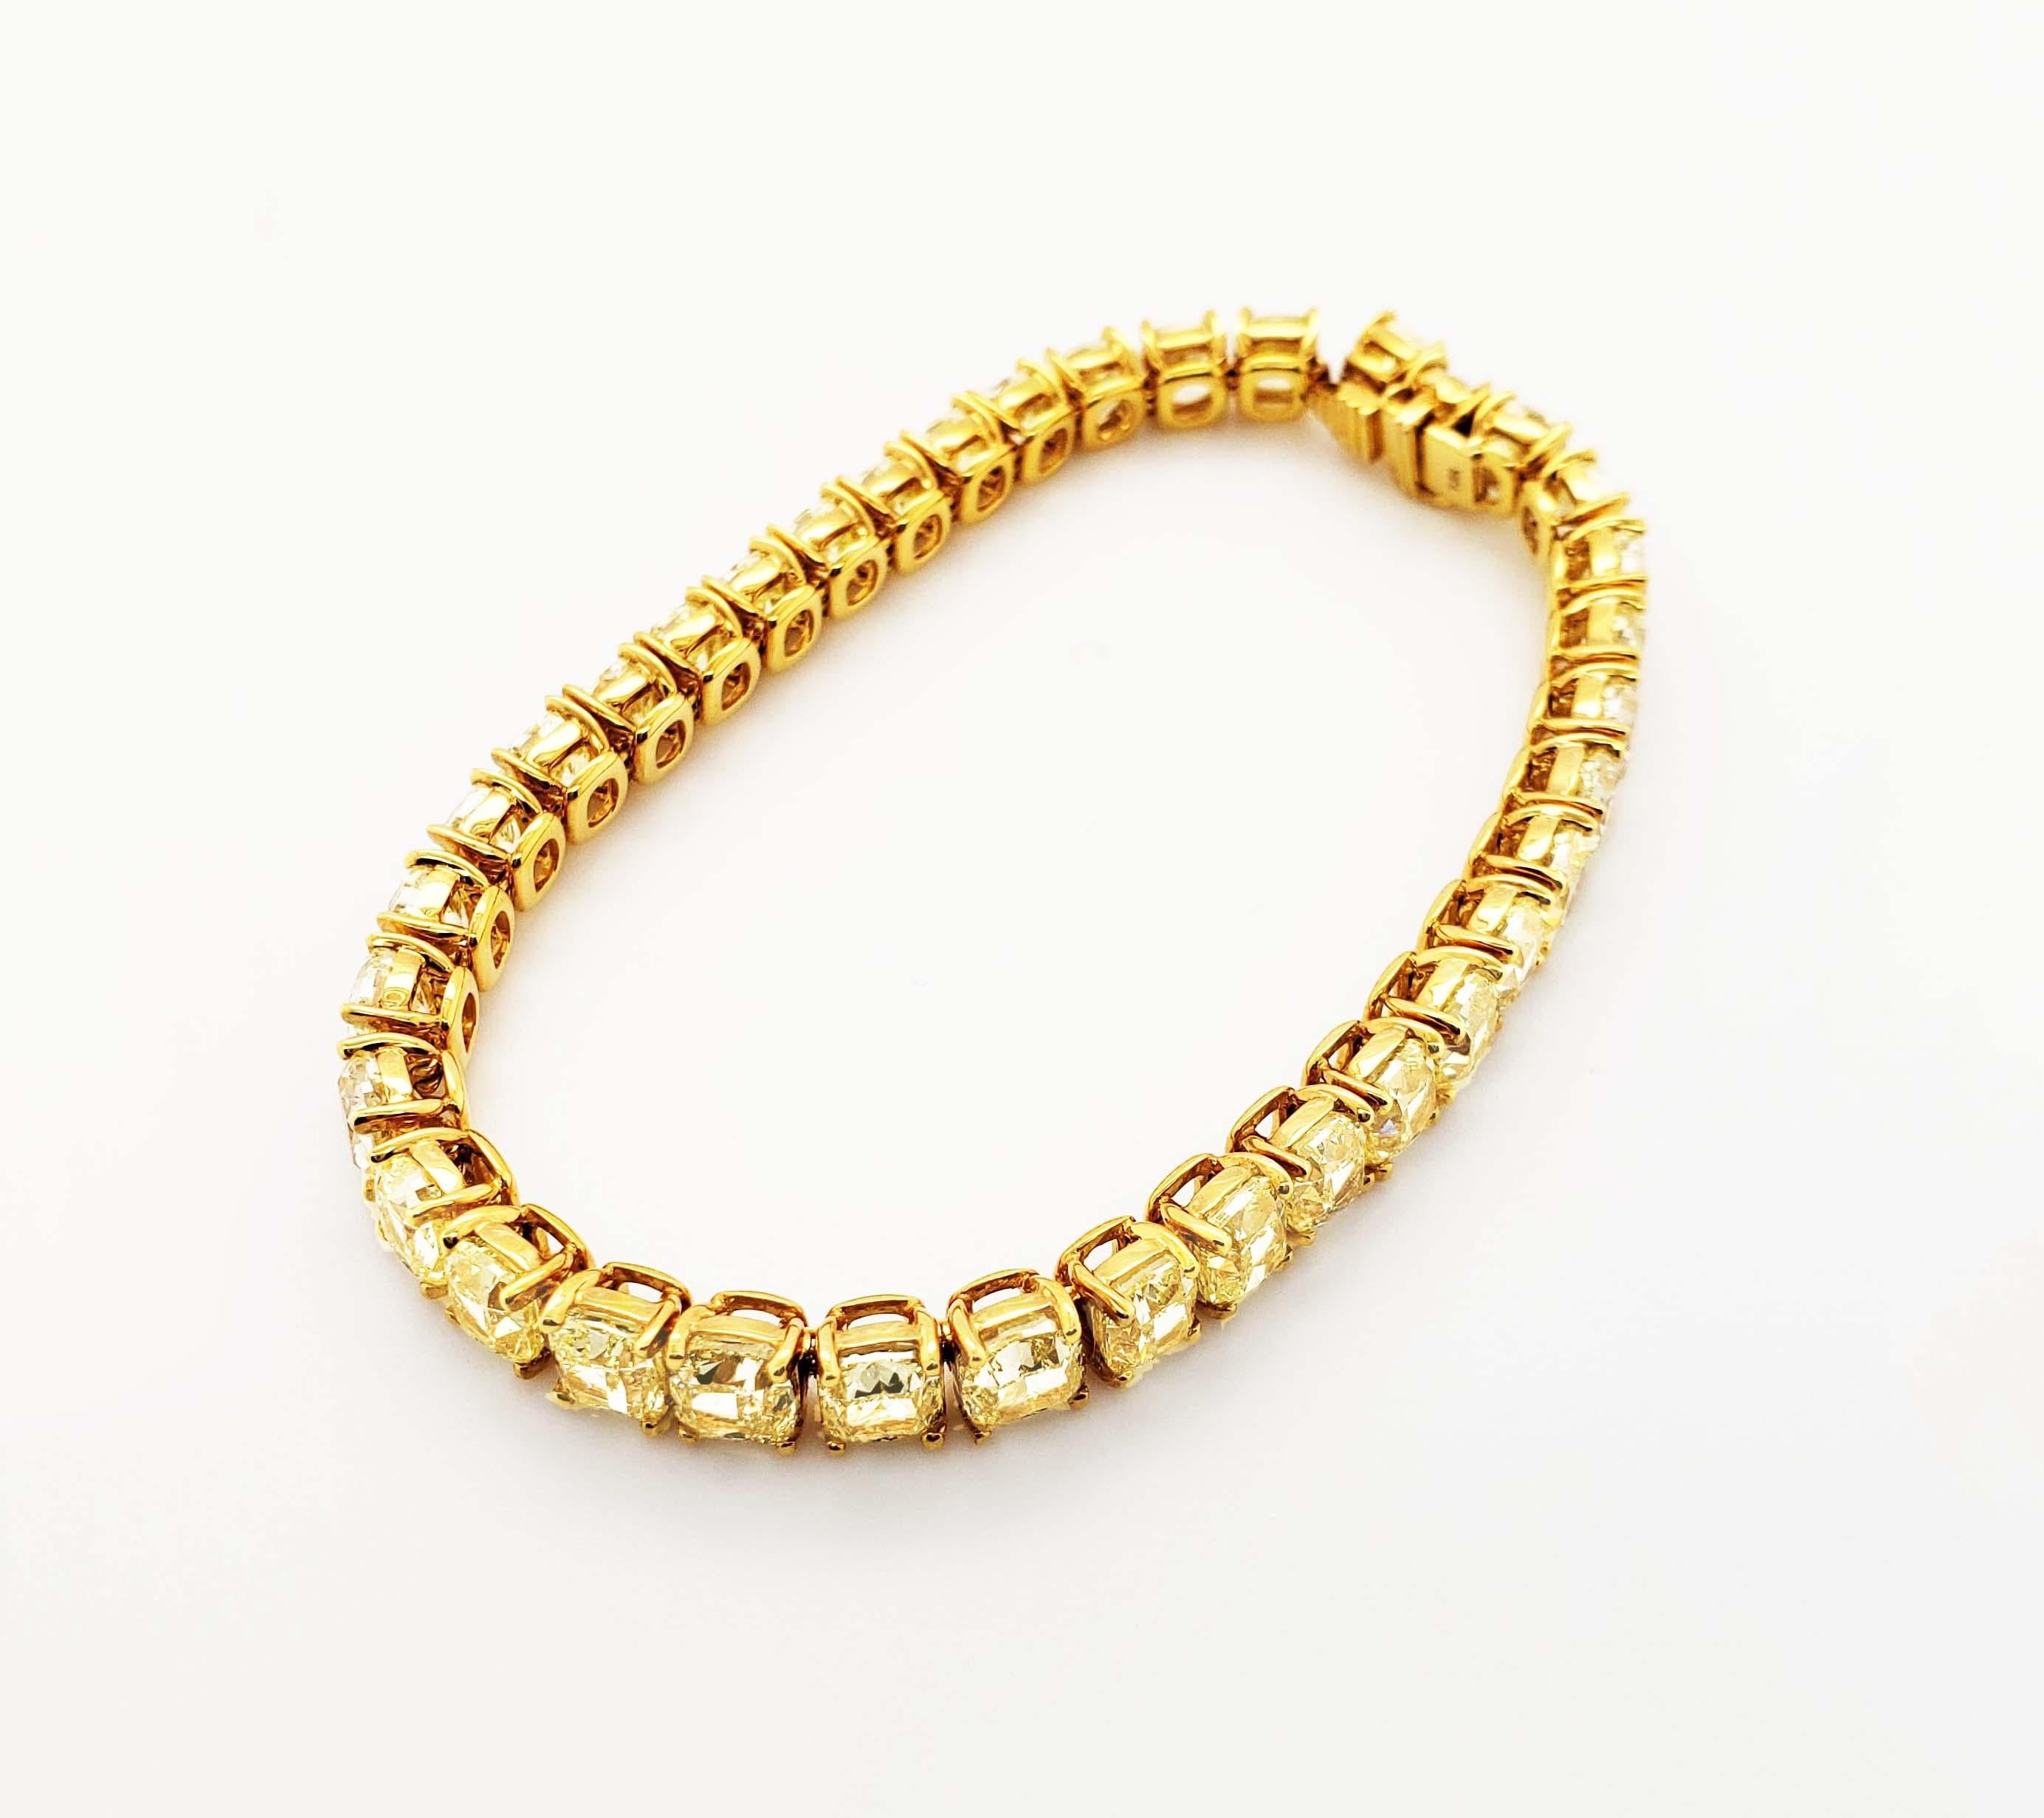 Natural fancy-yellow diamond line bracelet containing 32.78 carats of matched fancy yellow cushion cut diamonds of clarity grades VS2 to IF - each diamond is GIA graded with a report. GIA-certified diamond tennis bracelet with fancy yellow